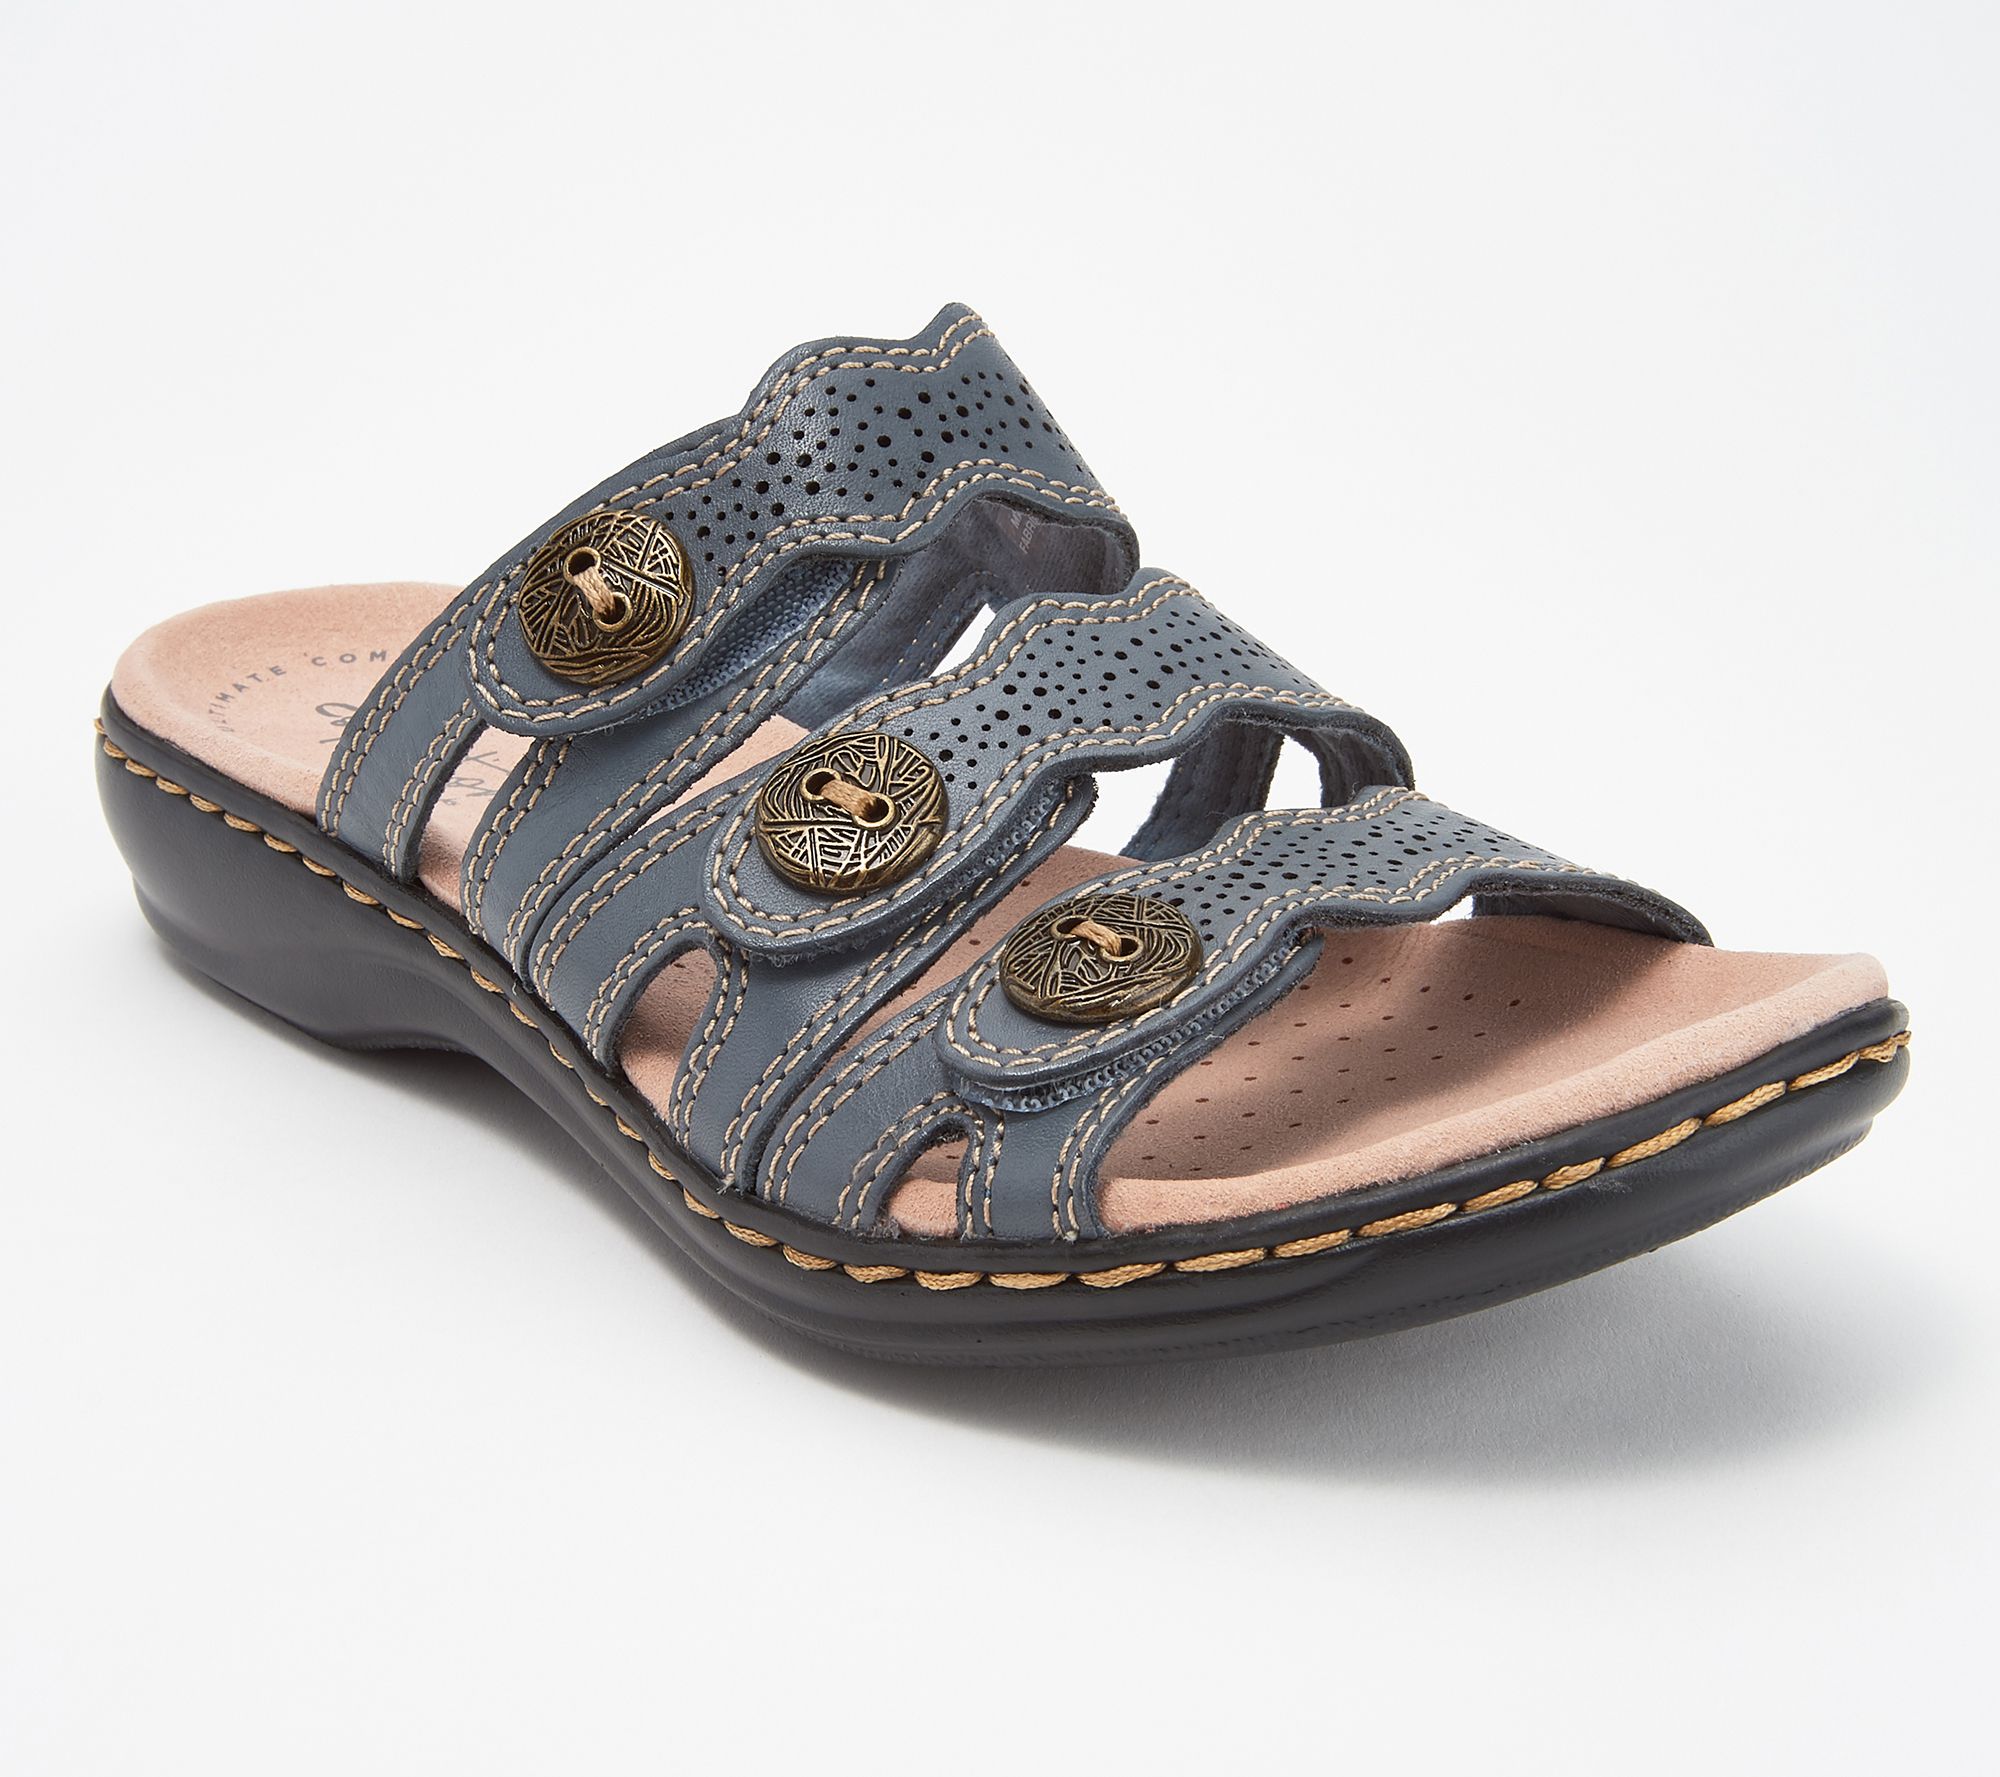 Clarks Collection Leather Sandals 